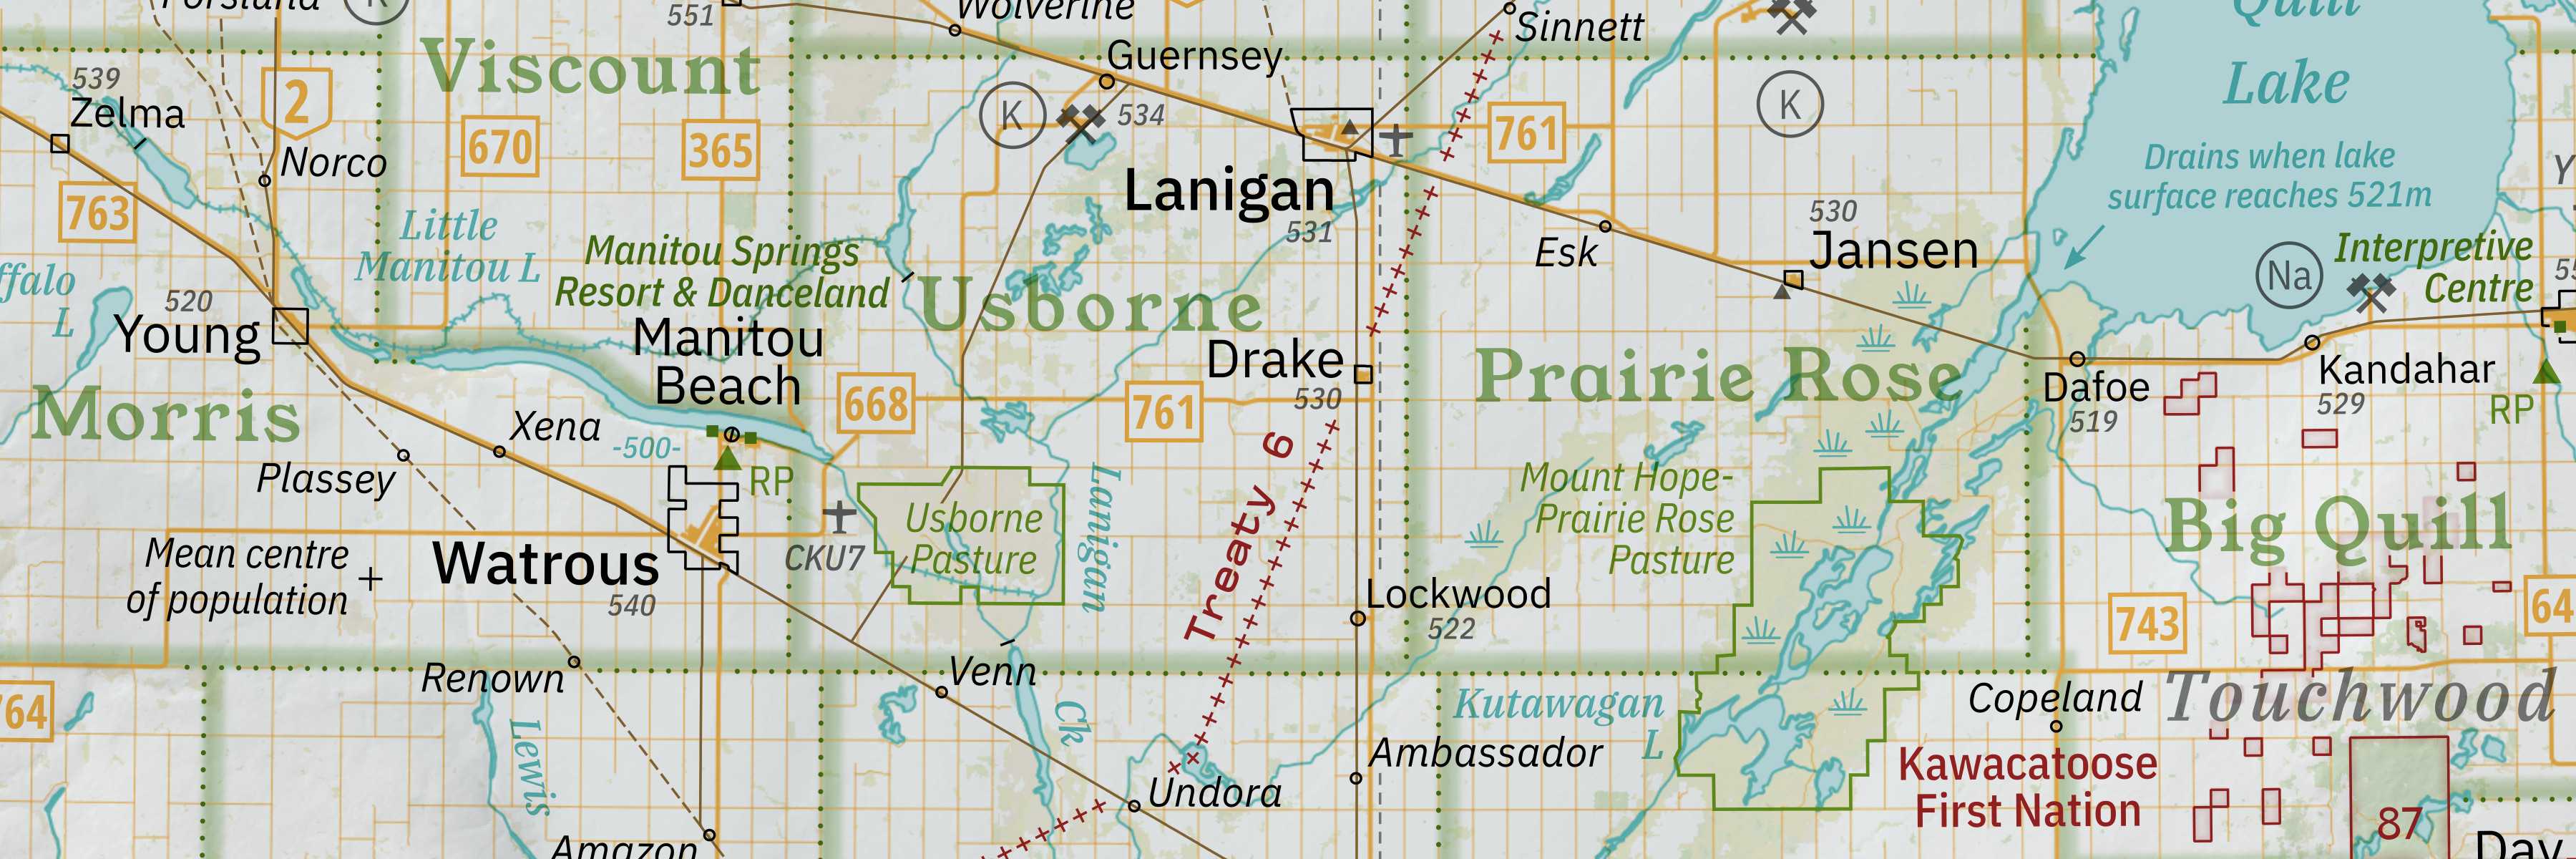 An excerpt of the wall map showing Watrous and the Quill Lakes.